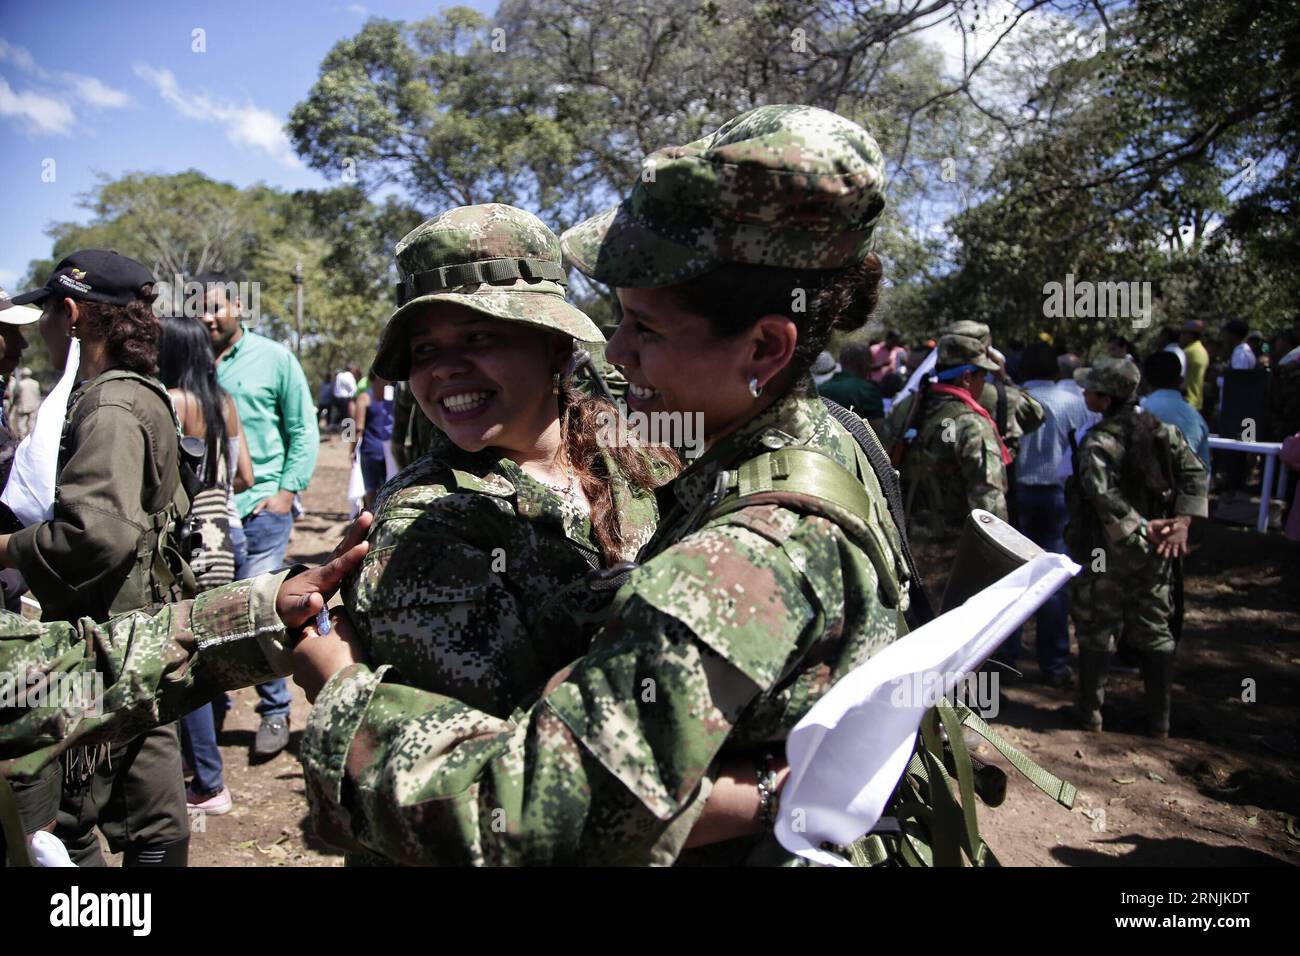 (170202) -- PONDORES, Feb. 1, 2017 -- Women of the Caribbean bloc of the Revolutionary Armed Forces of Colombia (FARC) hug with each other in the transition zone in Pondores, La Guajira department, Colombia, on Feb. 1, 2017. Colombia s FARC rebels have begun their final march towards designated transition zones, where they will lay down their weapons as part of a peace deal reached with the government, local media reported. Luisa Gonzalez/COLPRENSA) (da) (fnc) (cl) MANDATORY CREDIT NO SALES-NO ARCHIVE EDITORIAL USE ONLY COLOMBIA OUT COLOMBIA-PONDORES-POLITICS-FARC e COLPRENSA PUBLICATIONxNOTxI Stock Photo